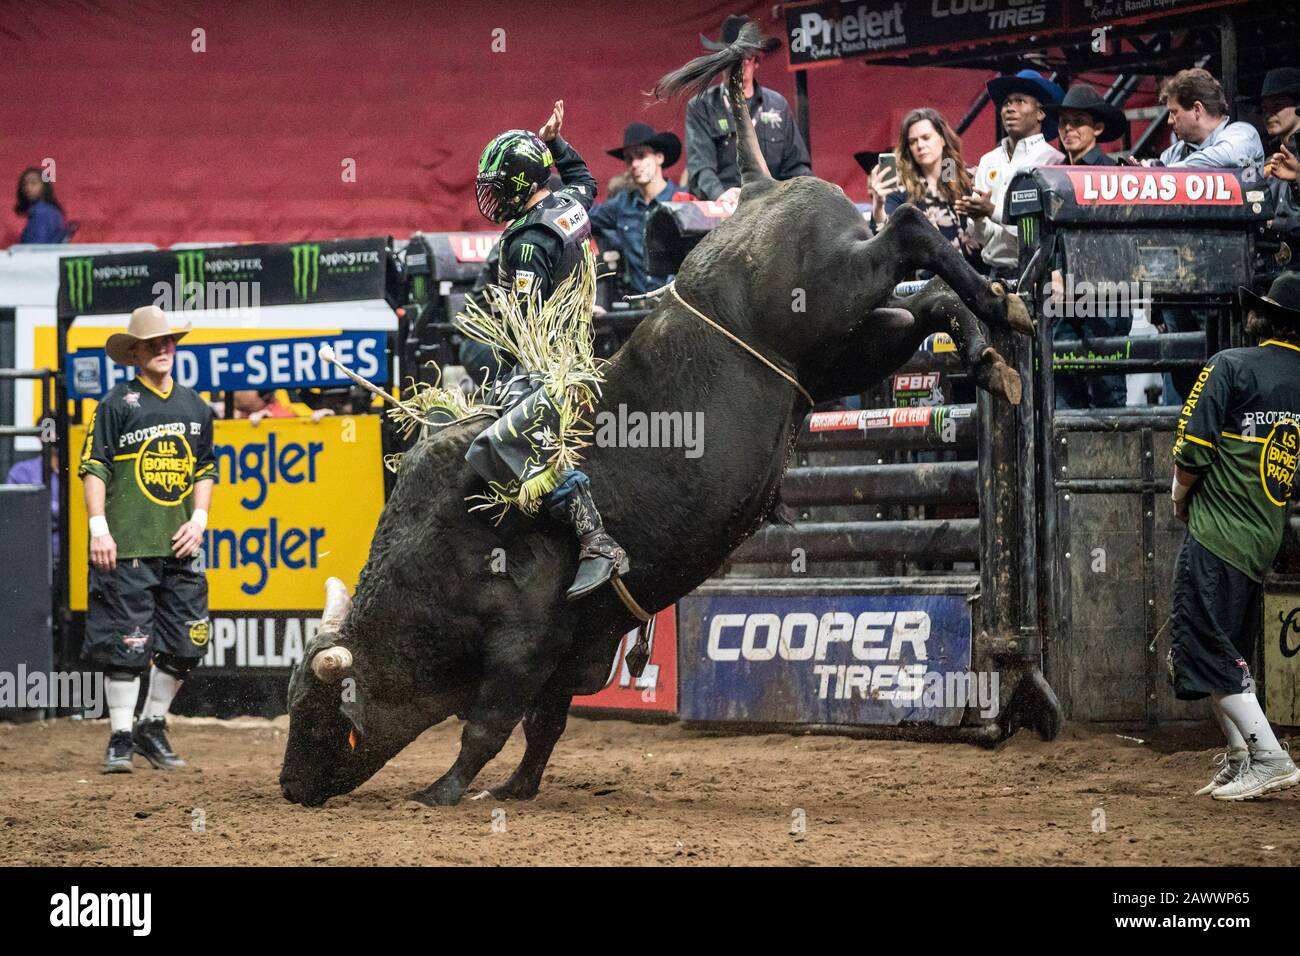 Jose Vitor Leme rides Crazy Days during PBR Unleash the Beast event, Friday, Feb. 7, 2020, in Los Angeles, USA. (Photo by IOS/ESPA-Images) Stock Photo